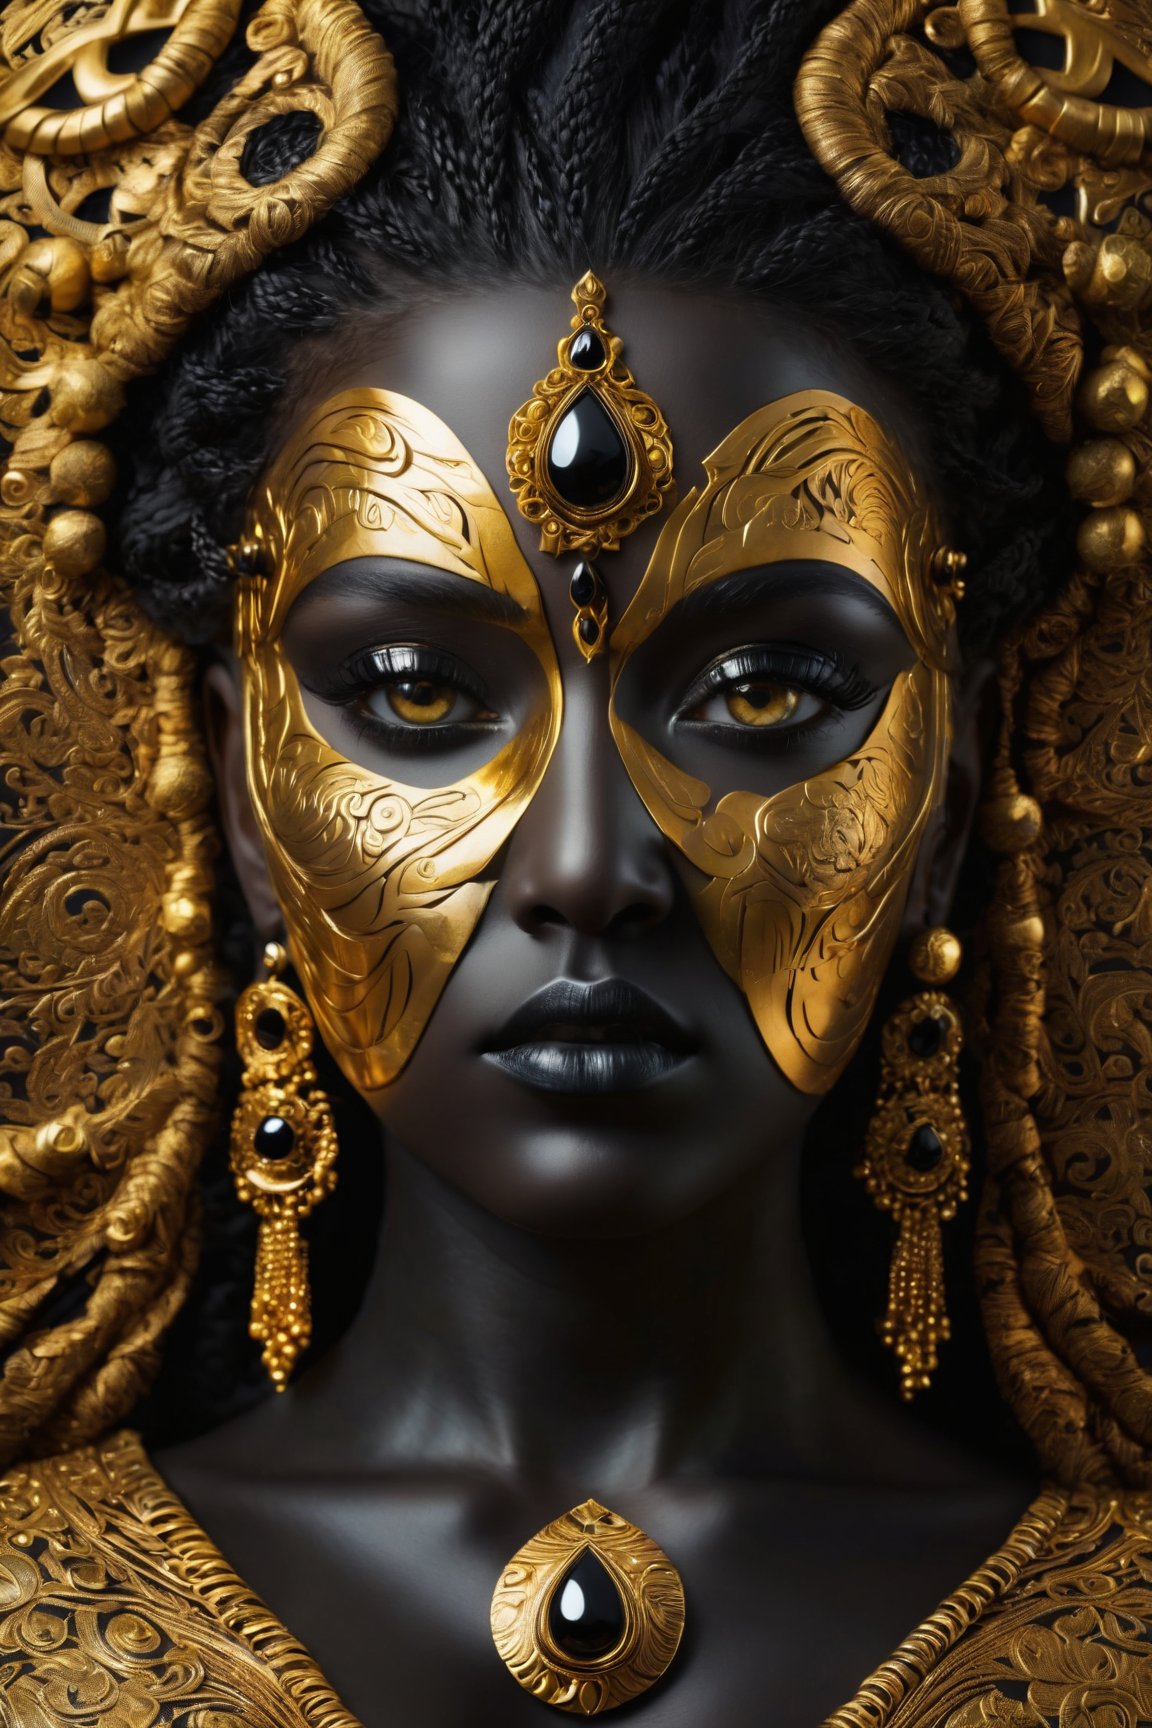 (best quality,8K,highres,masterpiece), ultra-detailed, (captivating black metalist), depiction of a captivating black metalist face with blackened eyes, featuring matte black eyes and intricate golden VA designs delicately adorning the face with golden beads. The image is rendered in high definition, capturing every nuanced detail of the metalist's expression and the ornate golden patterns that embellish their visage. The contrast between the dark, mysterious eyes and the shimmering gold creates a visually striking and enigmatic composition, inviting viewers to delve into the depths of the metalist's persona.